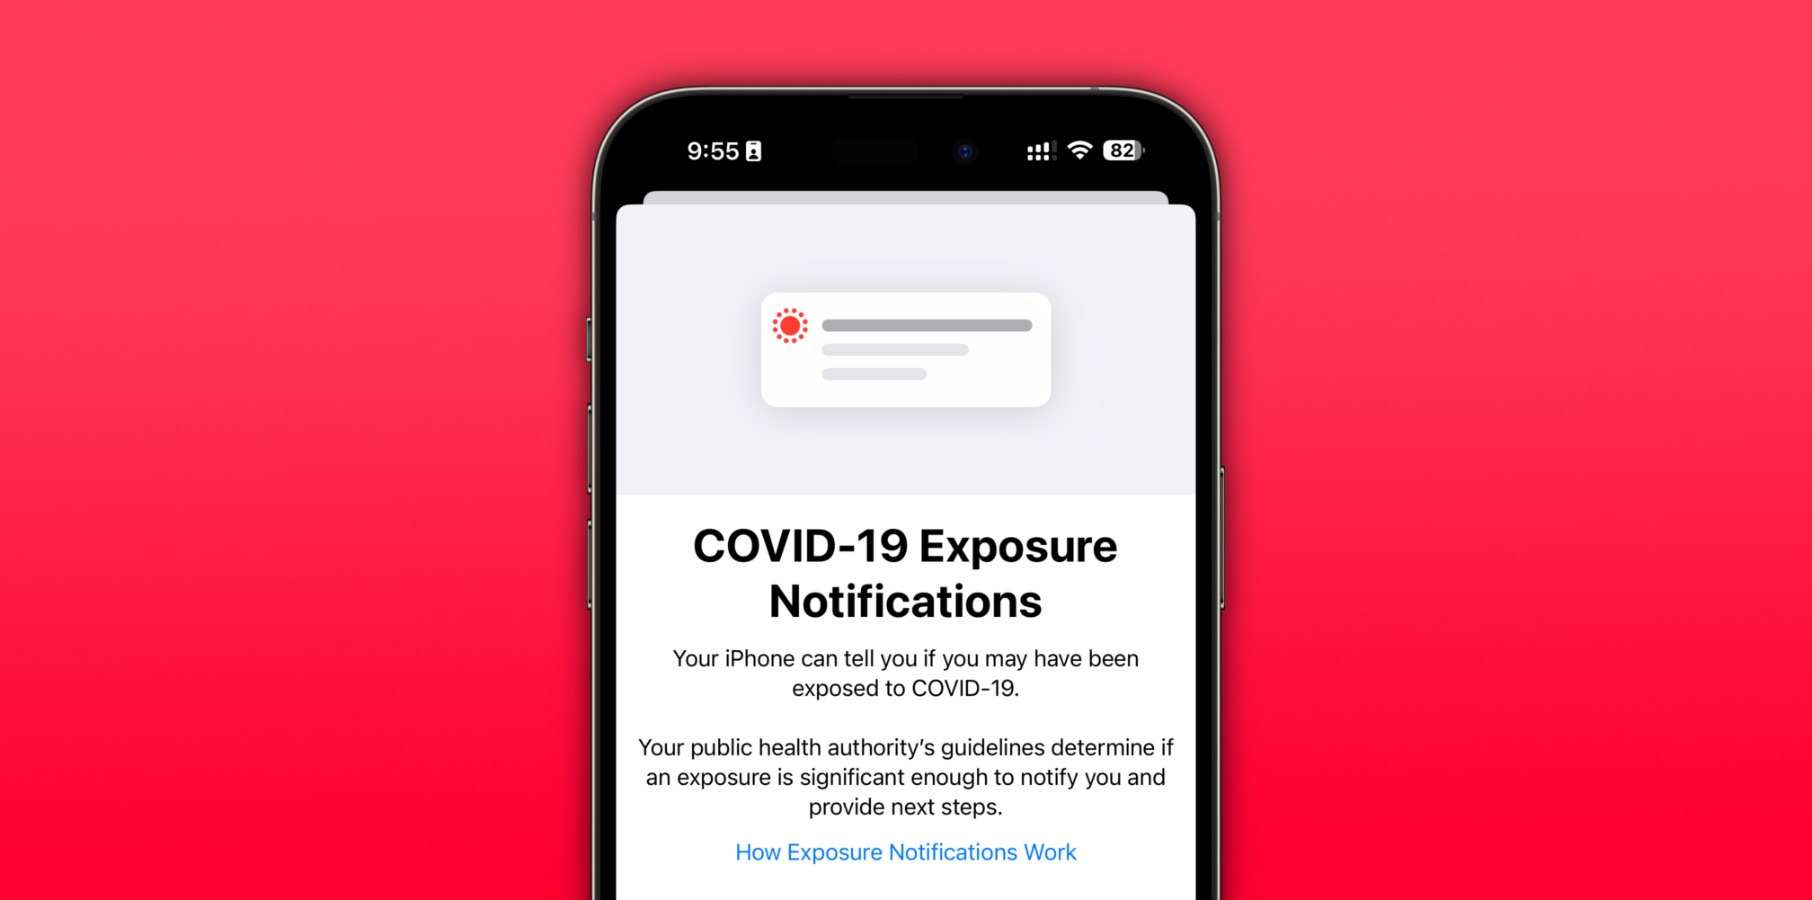 Health authorities can now end support for Apple’s COVID-19 Exposure Notifications